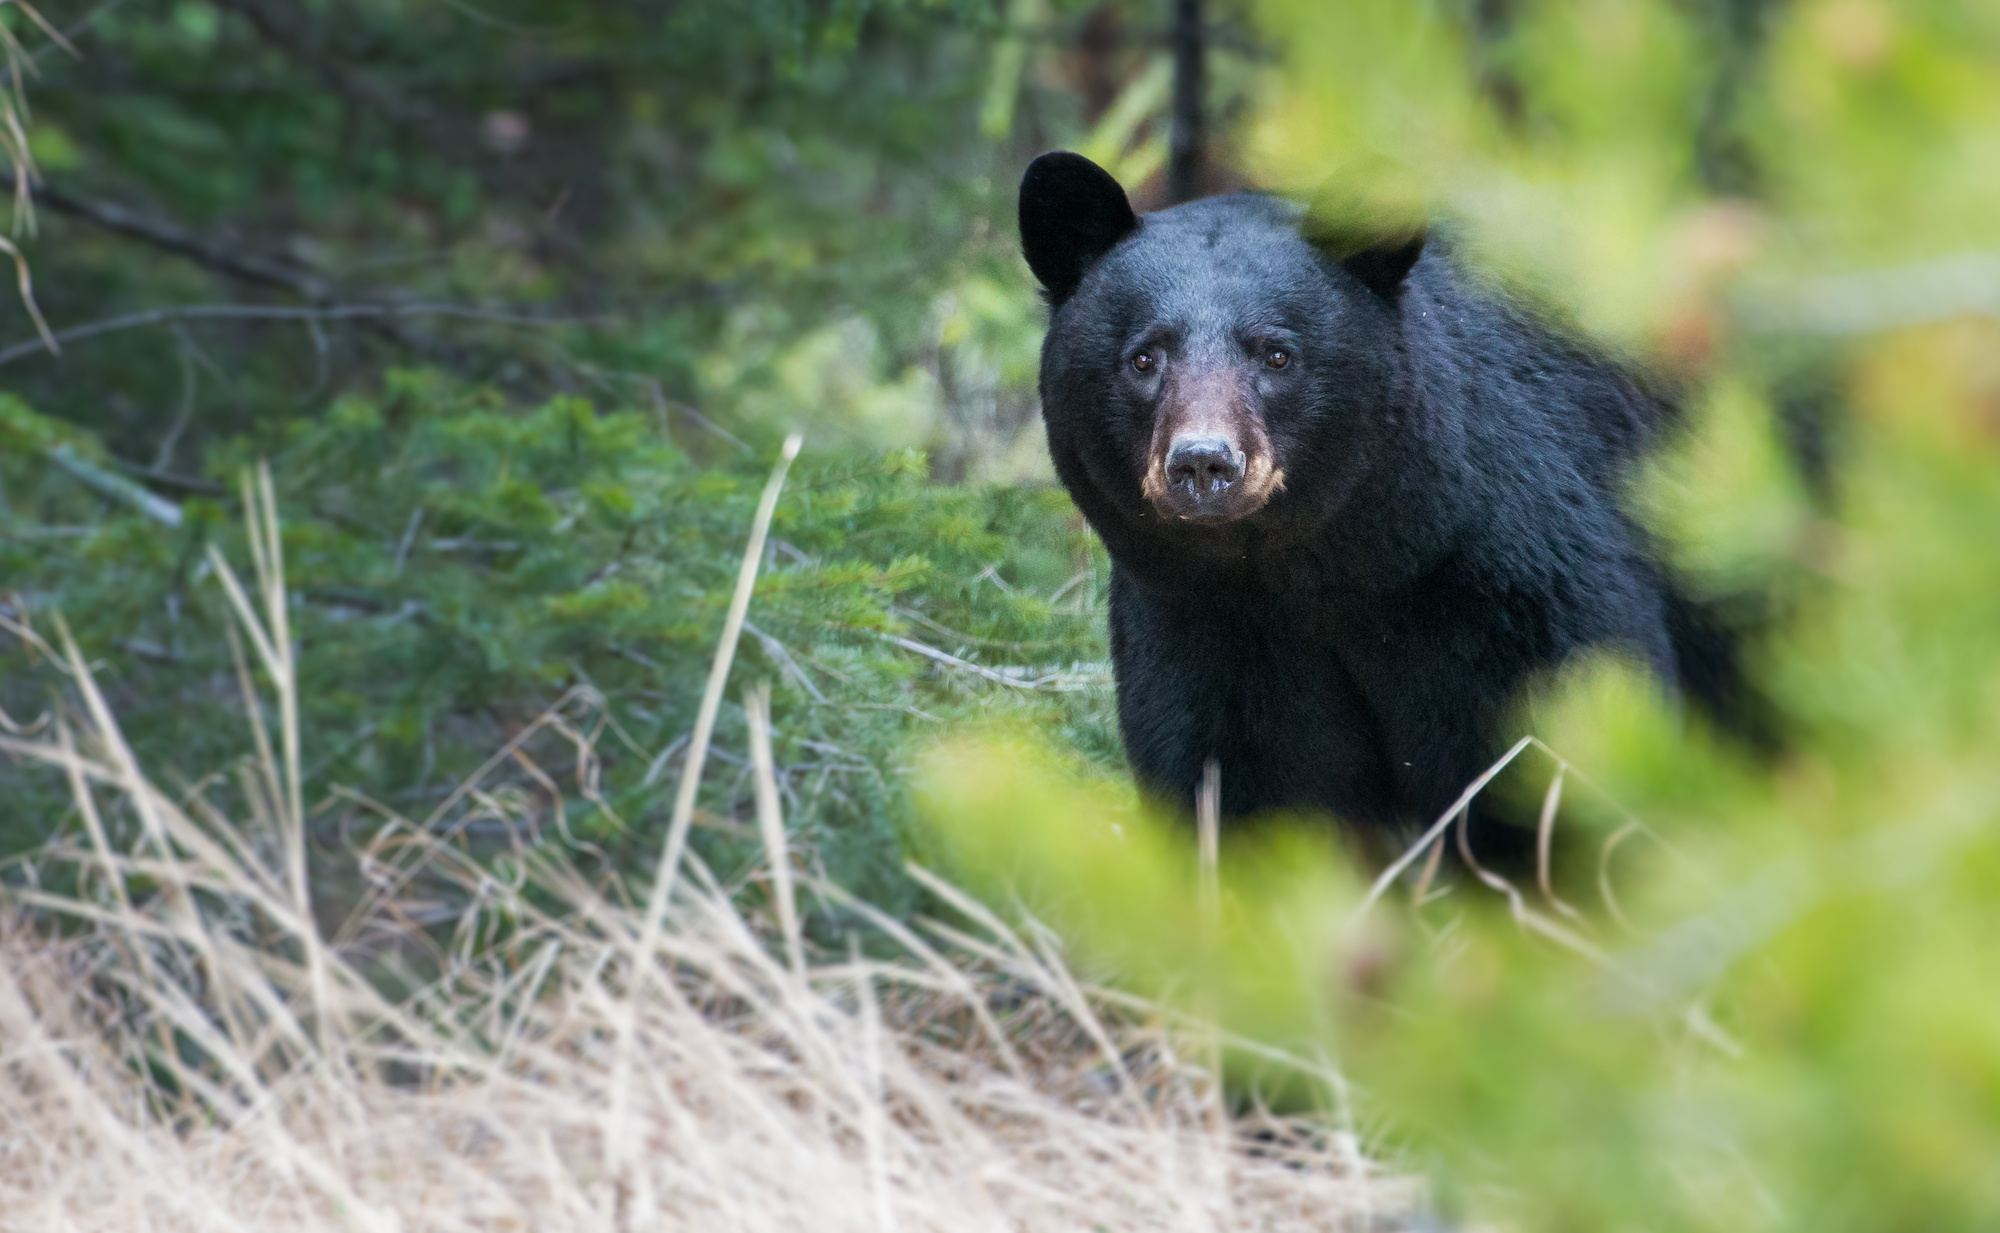 A black bear in the forest.